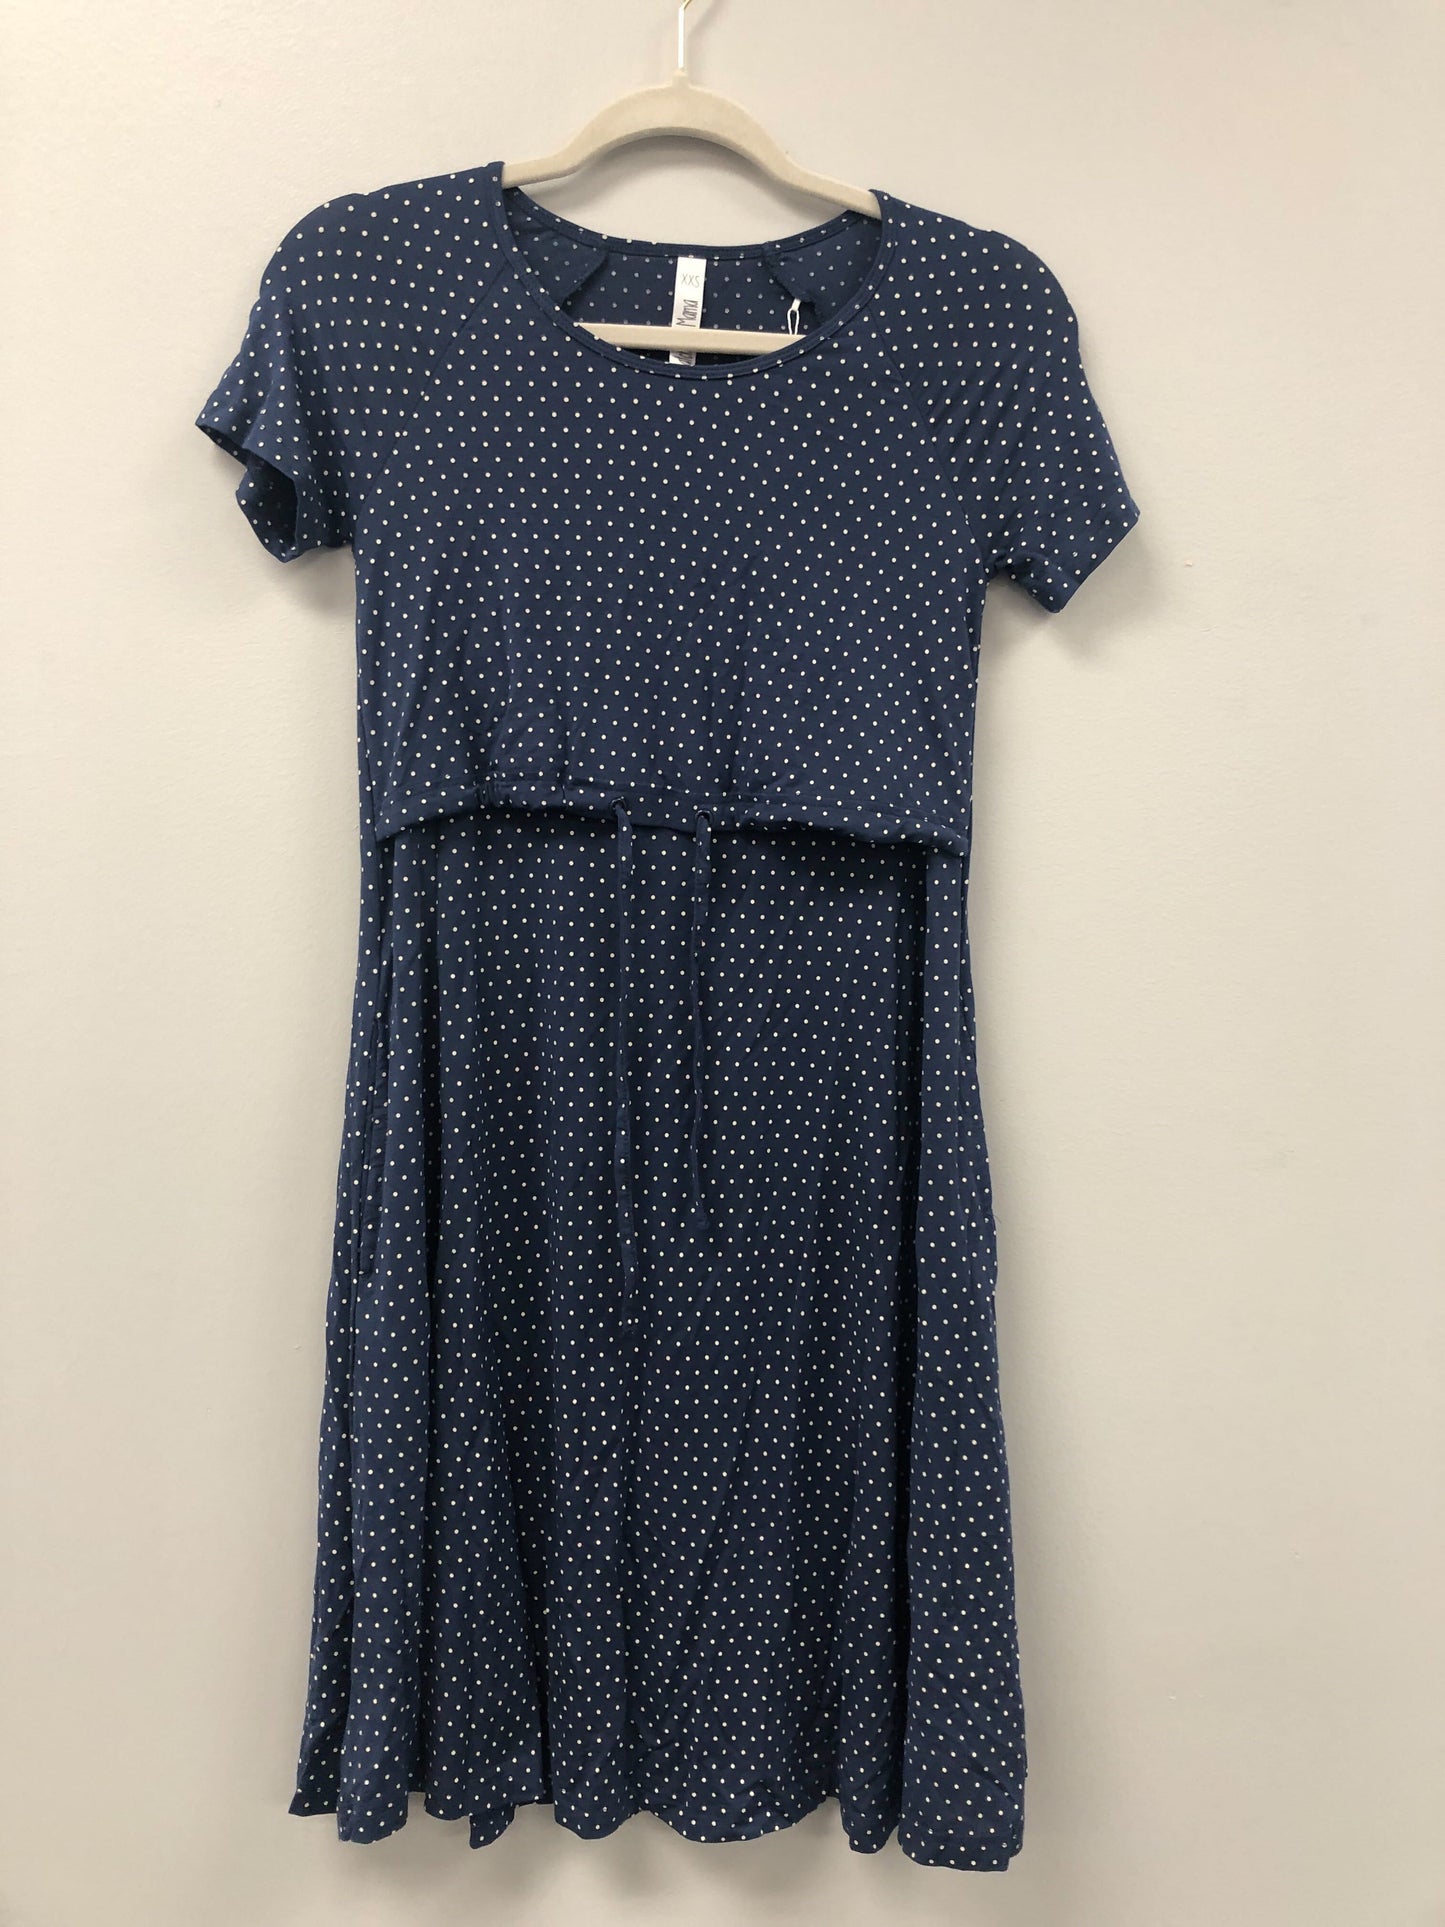 Outlet 5896 - Latched Mama Drawstring T-Shirt Nursing Dress - Blue Grey Dots - Extra Extra Small